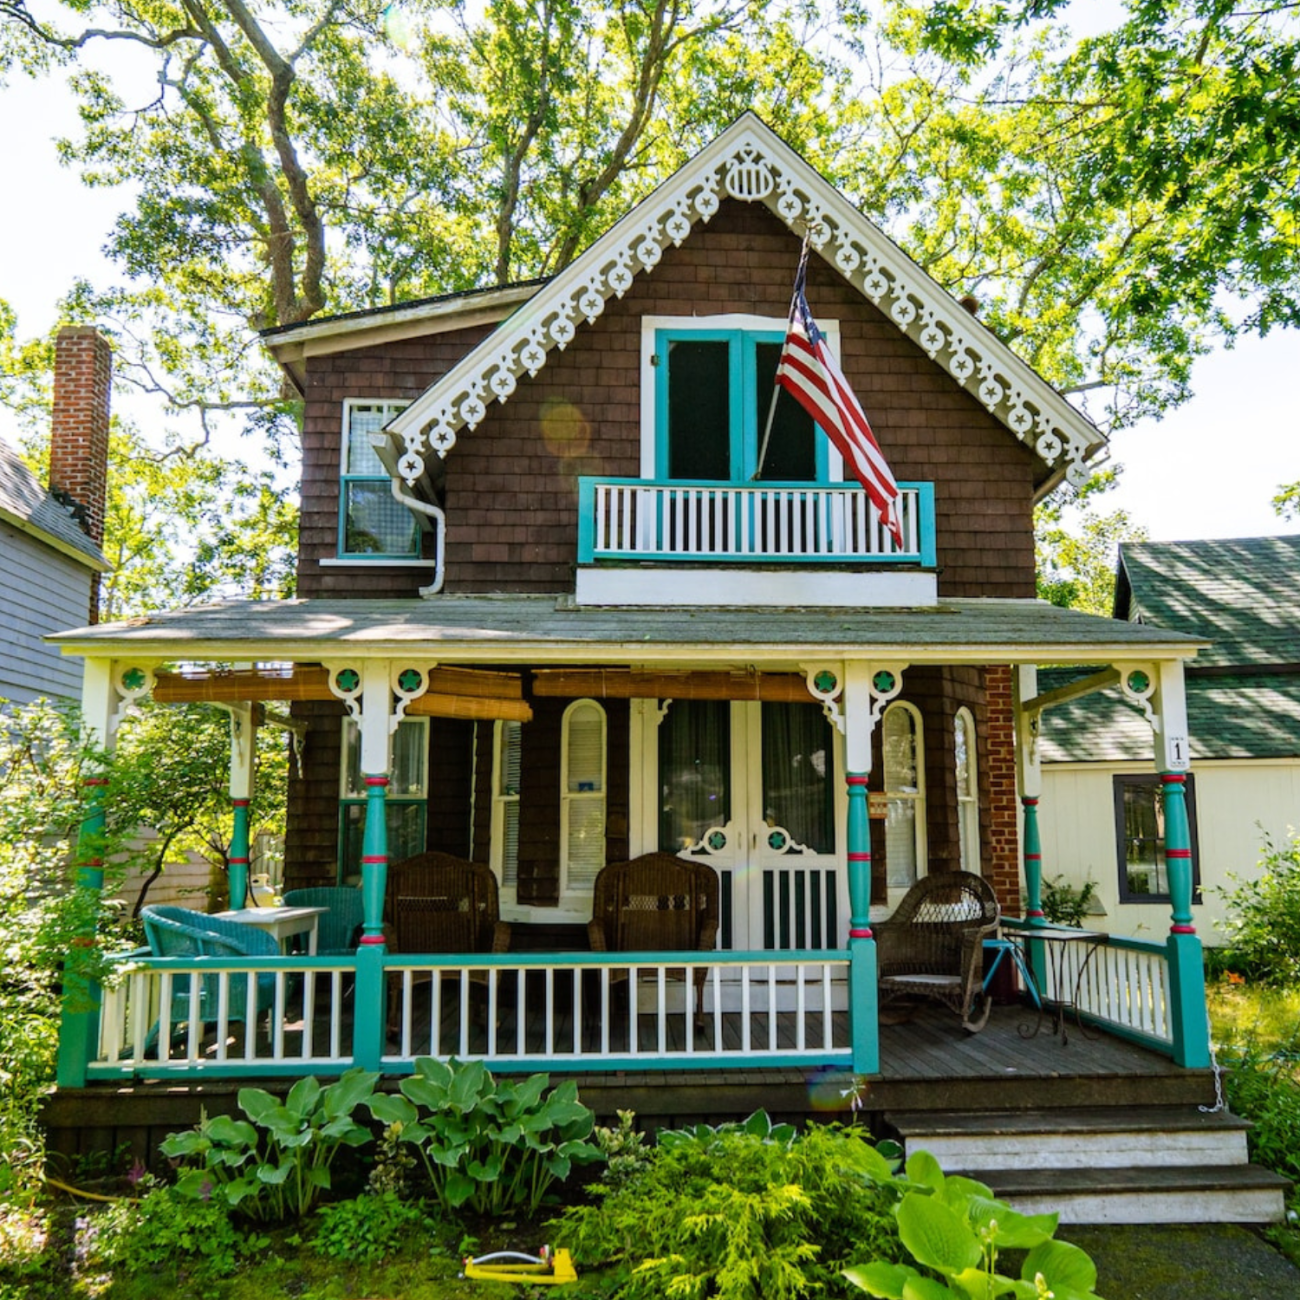 A brown gingerbread cottage in Martha's Vineyard.  Trim work on house is a brightly colored teal. An American flag flies in the second floor balcony.